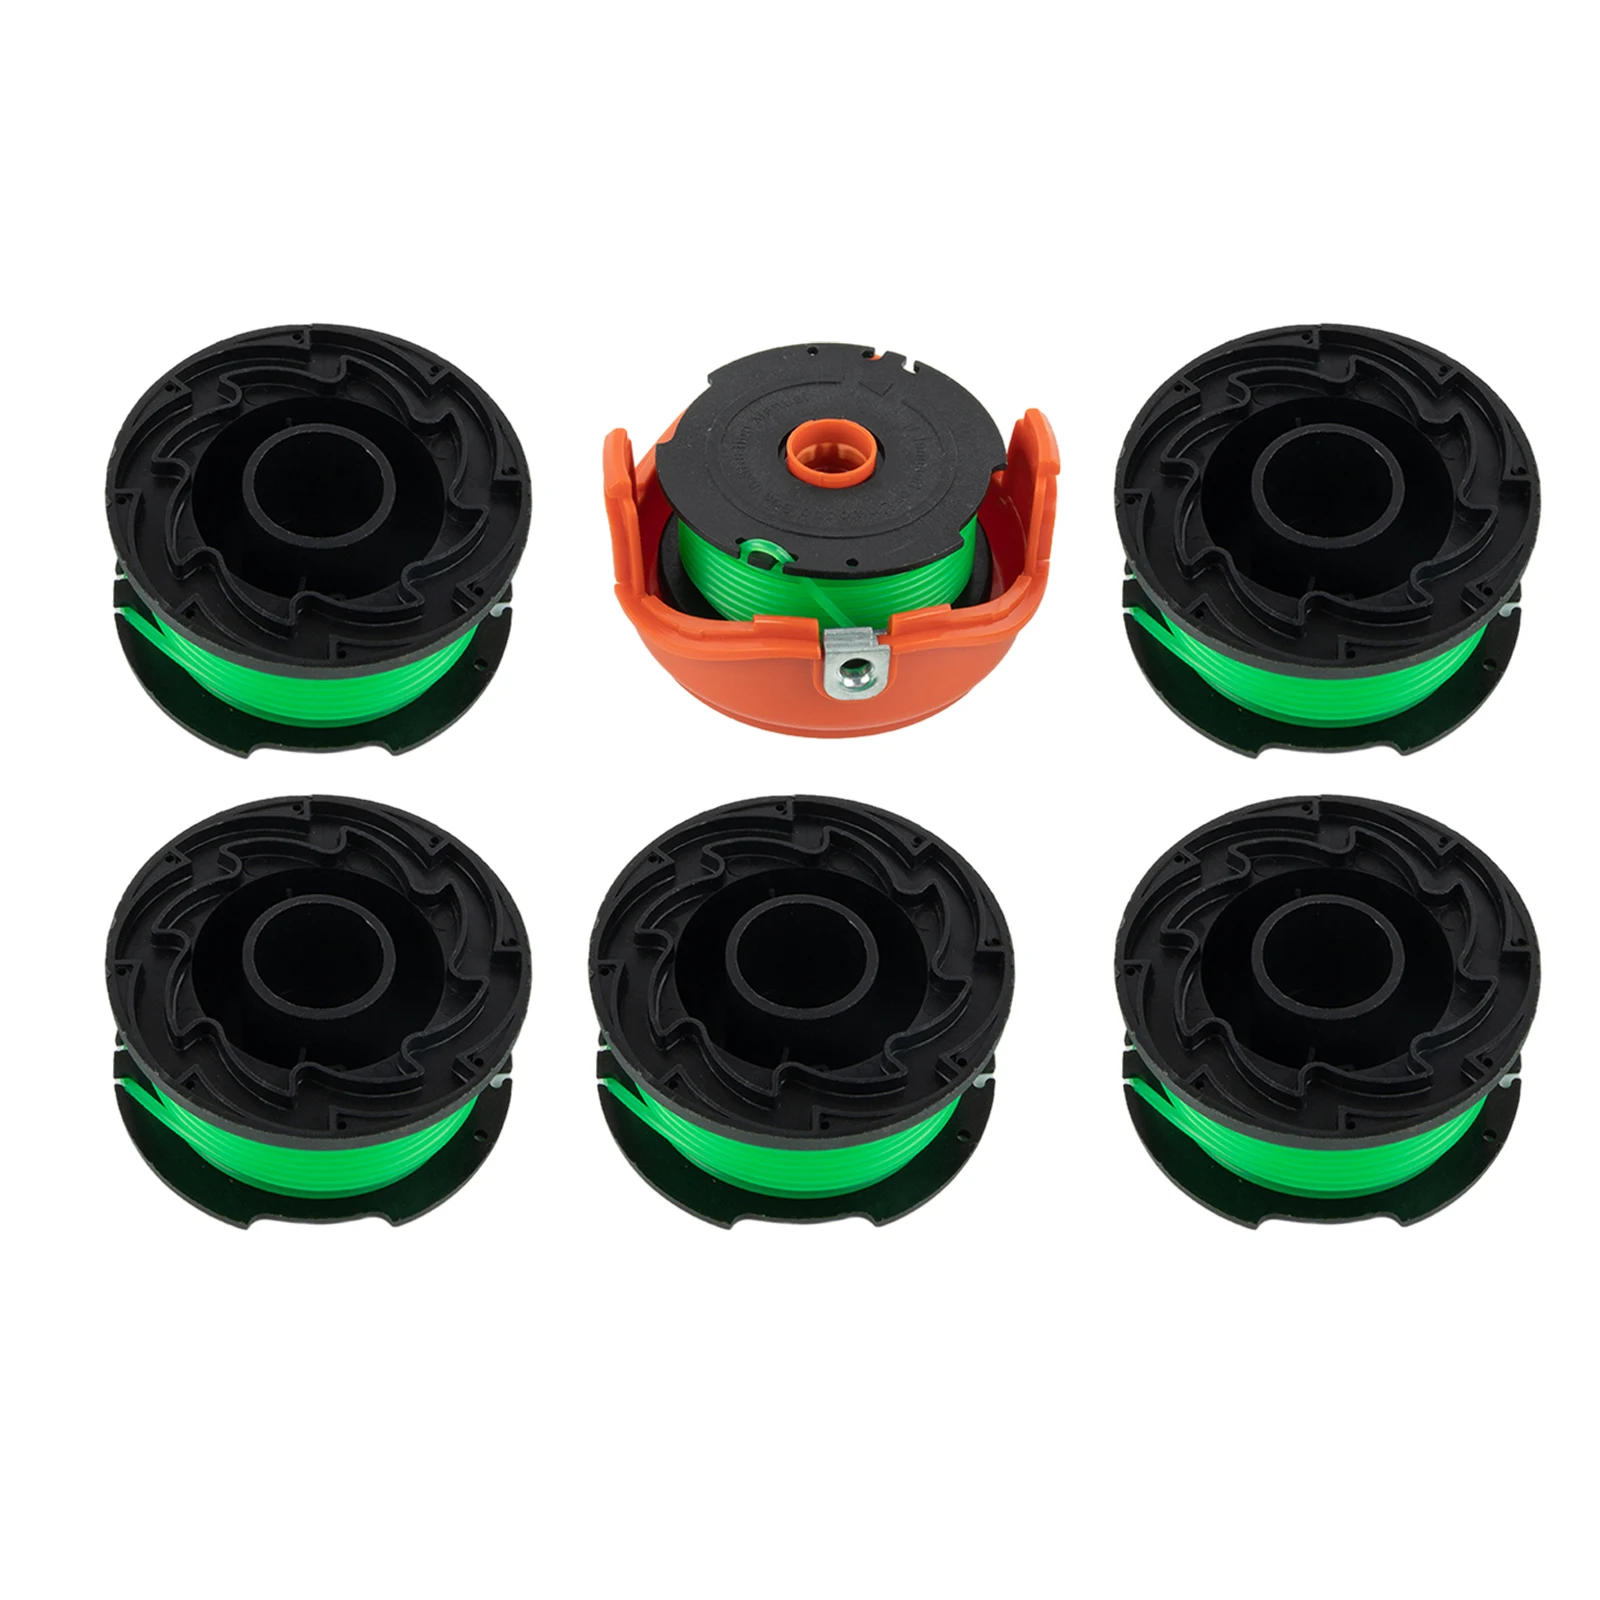 

Brand New Spool Cap Lawn Mower Parts Long Service Life Solid Delicate Easy To Install Exquisite Highly Match Garden